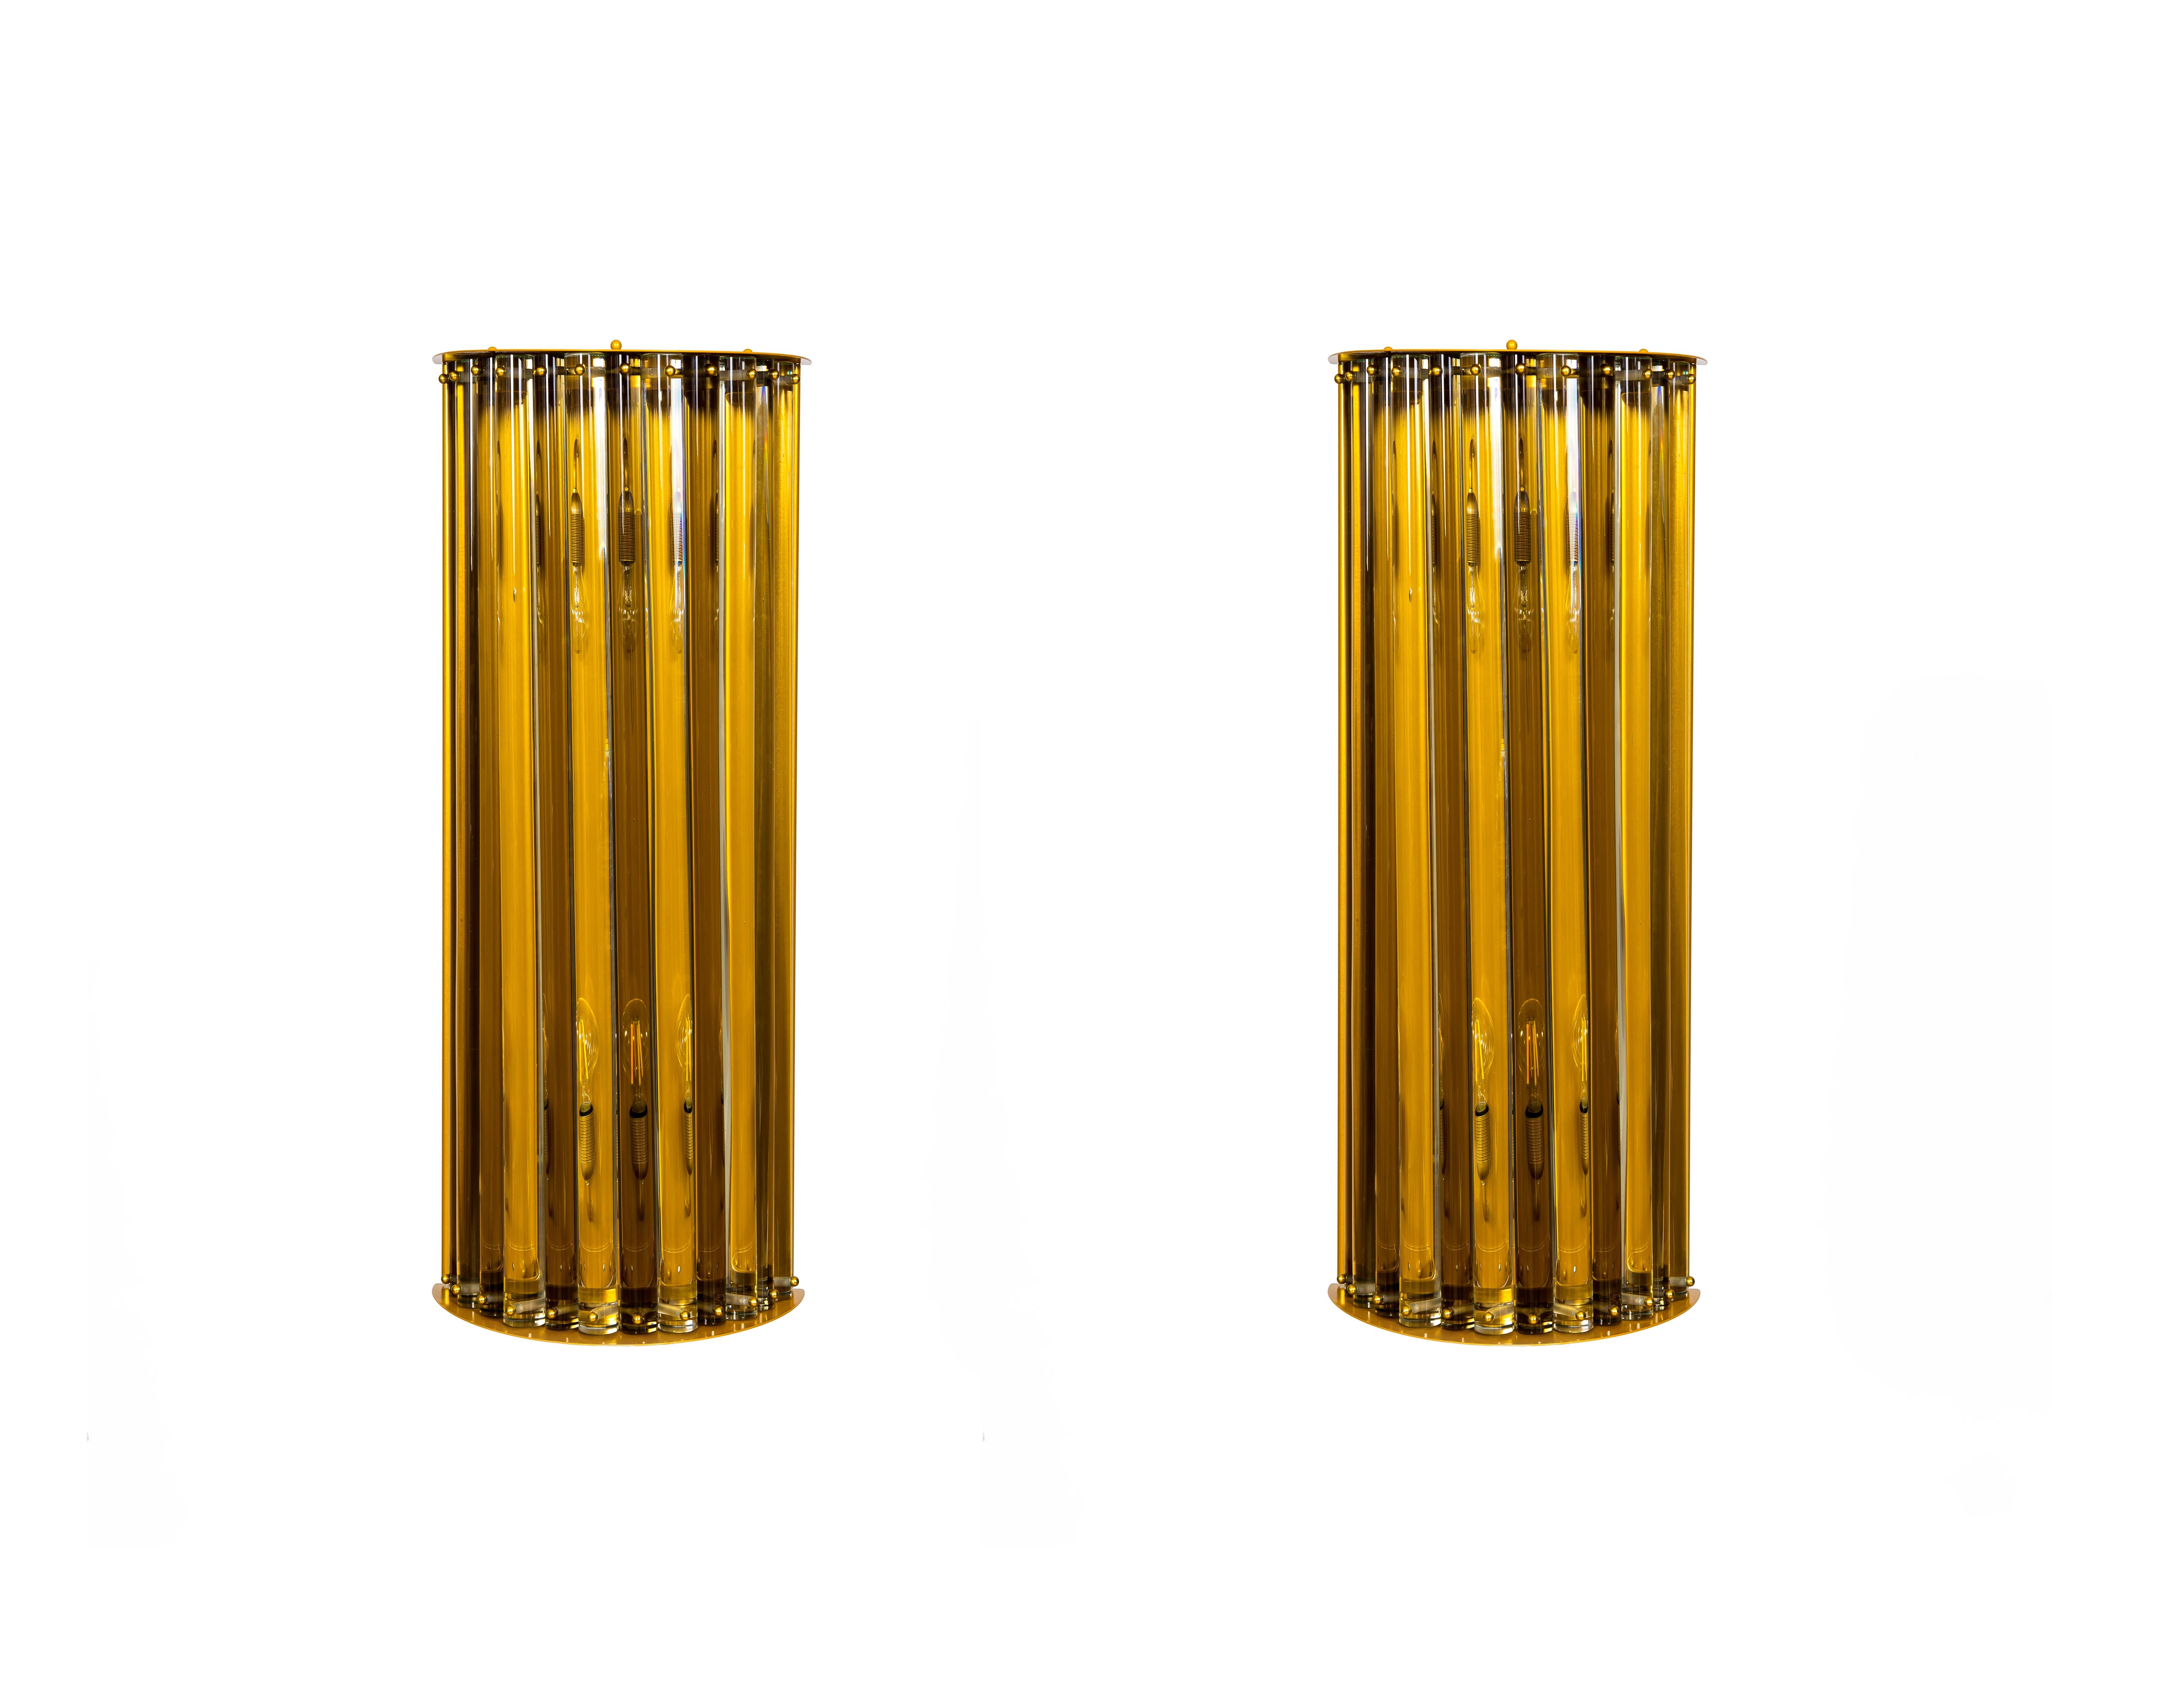 Pair of Murano Glass wall Lights Straw-Colored by Giovanni dalla Fina, contemporary.
This is a fantastic pair of sconces entirely handcrafted in blown Murano glass, designed and manufactured by the Italian artist and designer Giovanni Dalla Fina.